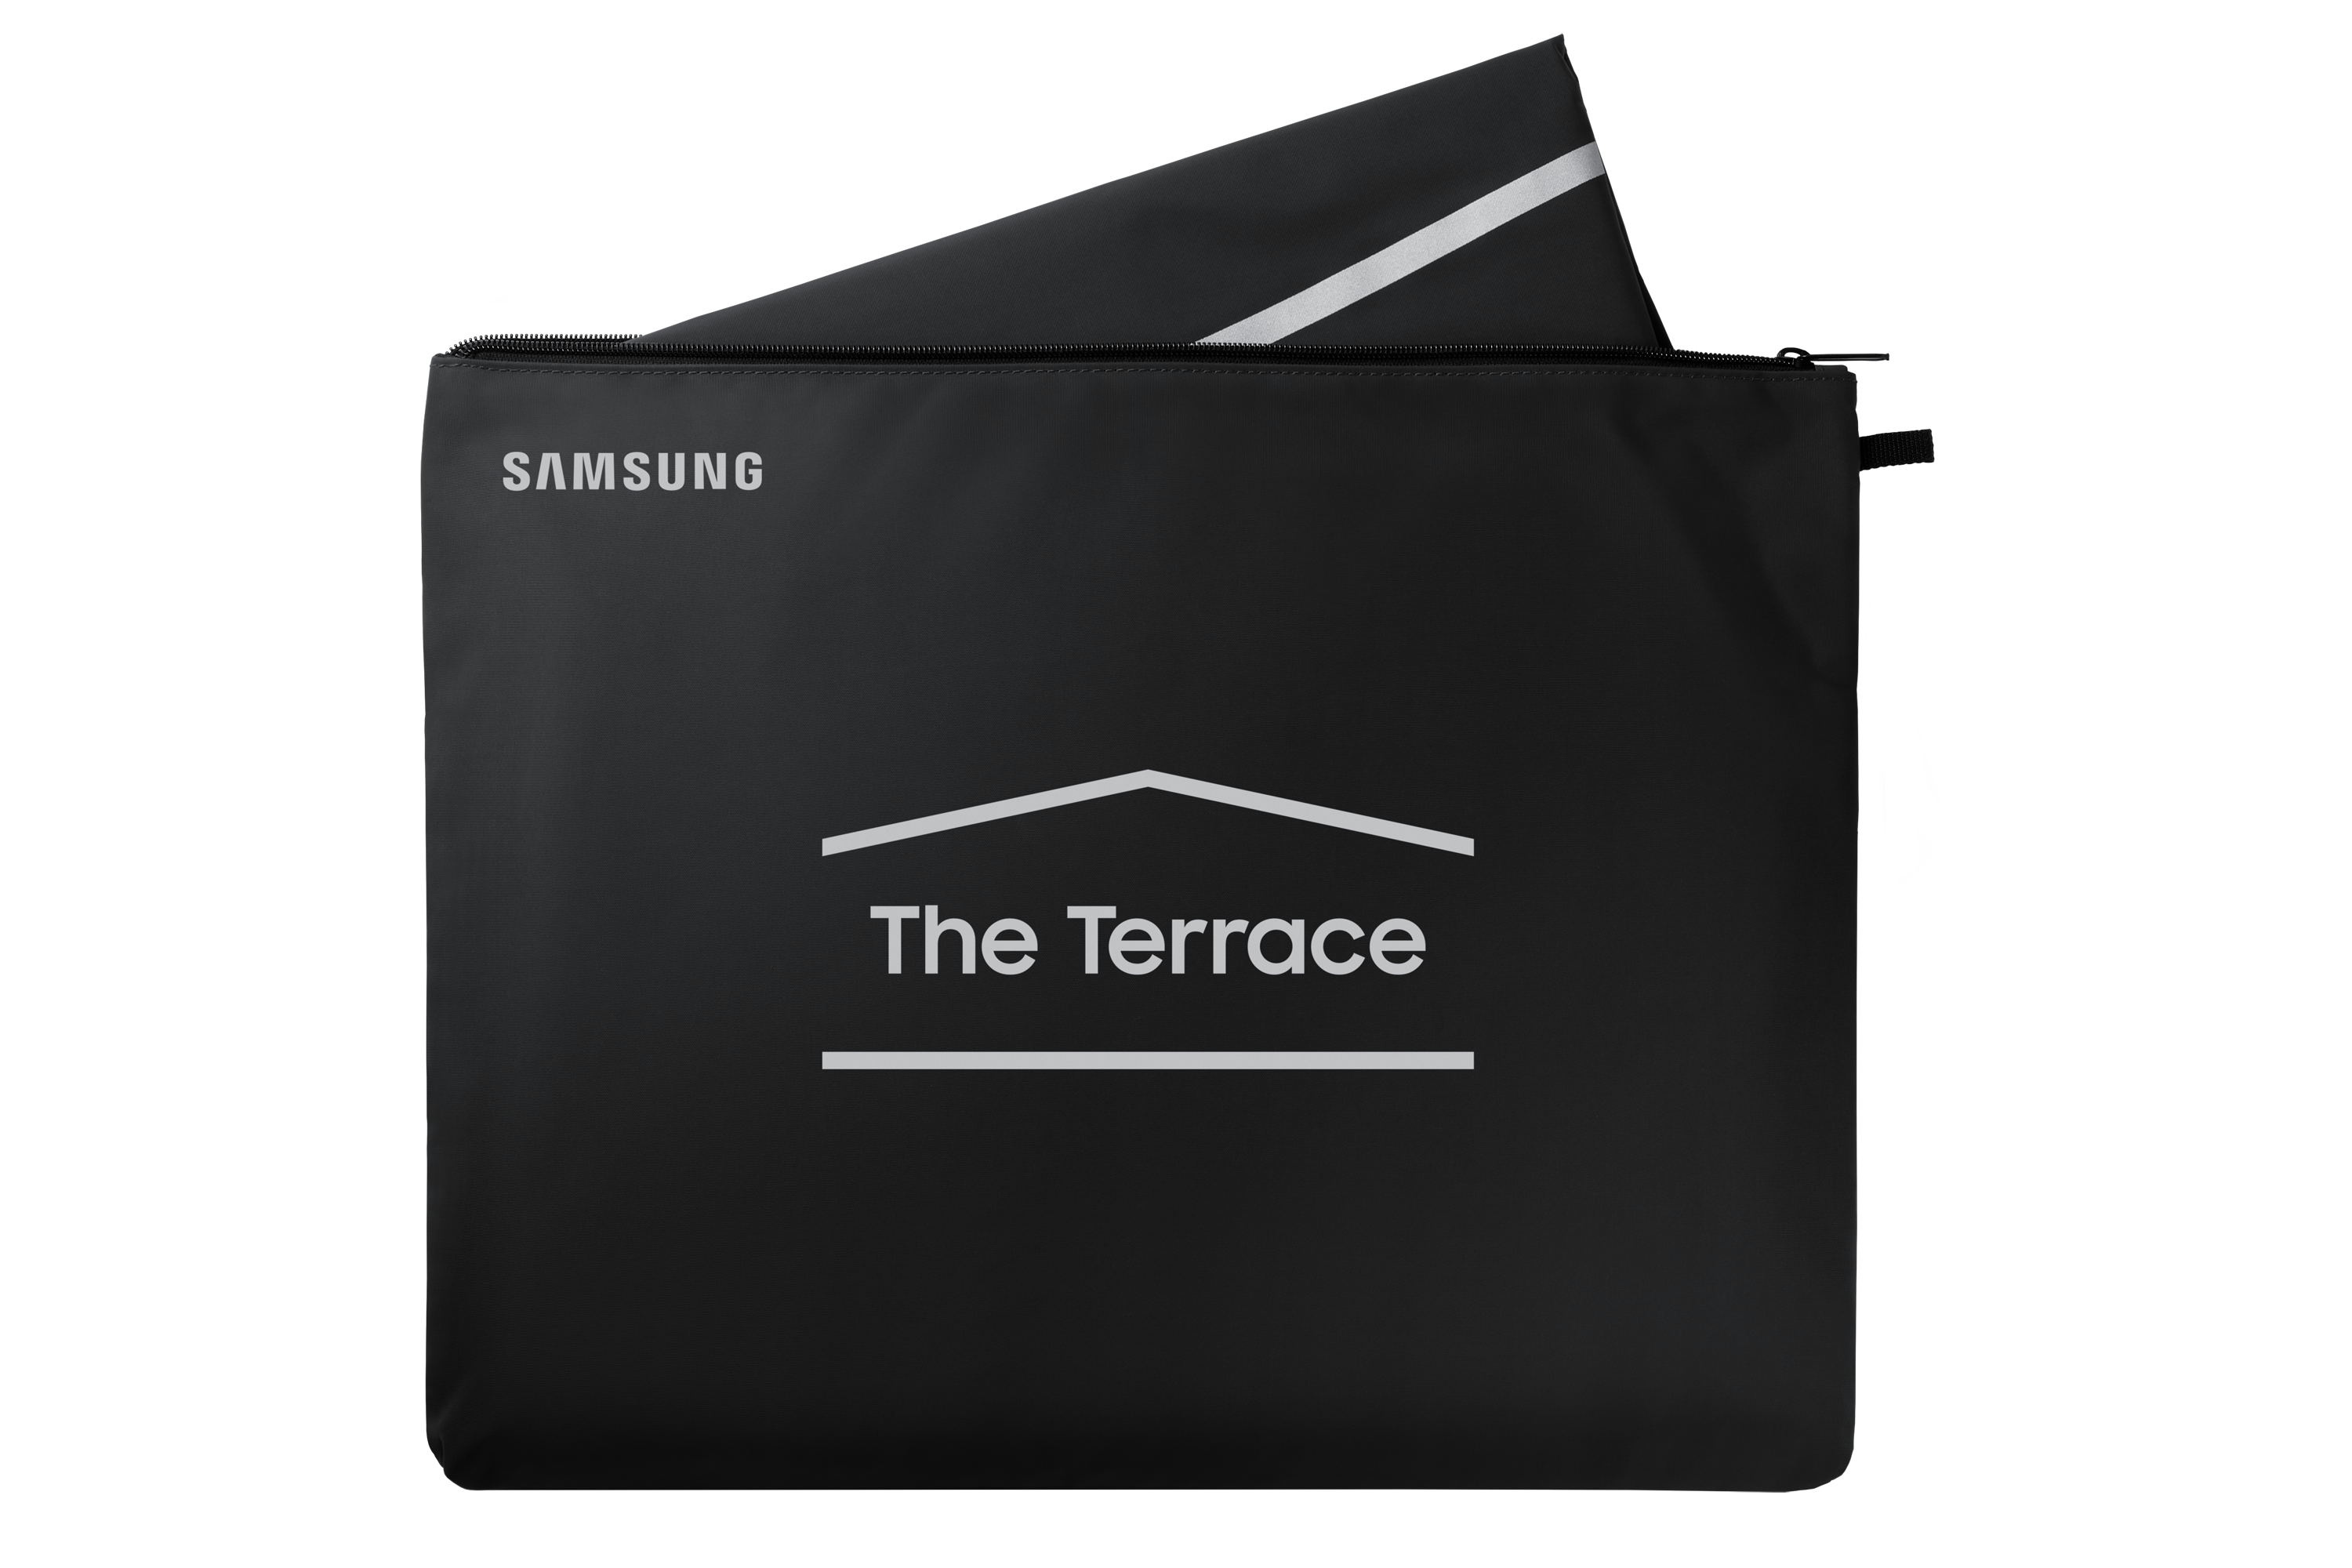 Samsung 65" The Terrace Outdoor TV Dust Cover VG-SDCC65G/ZA